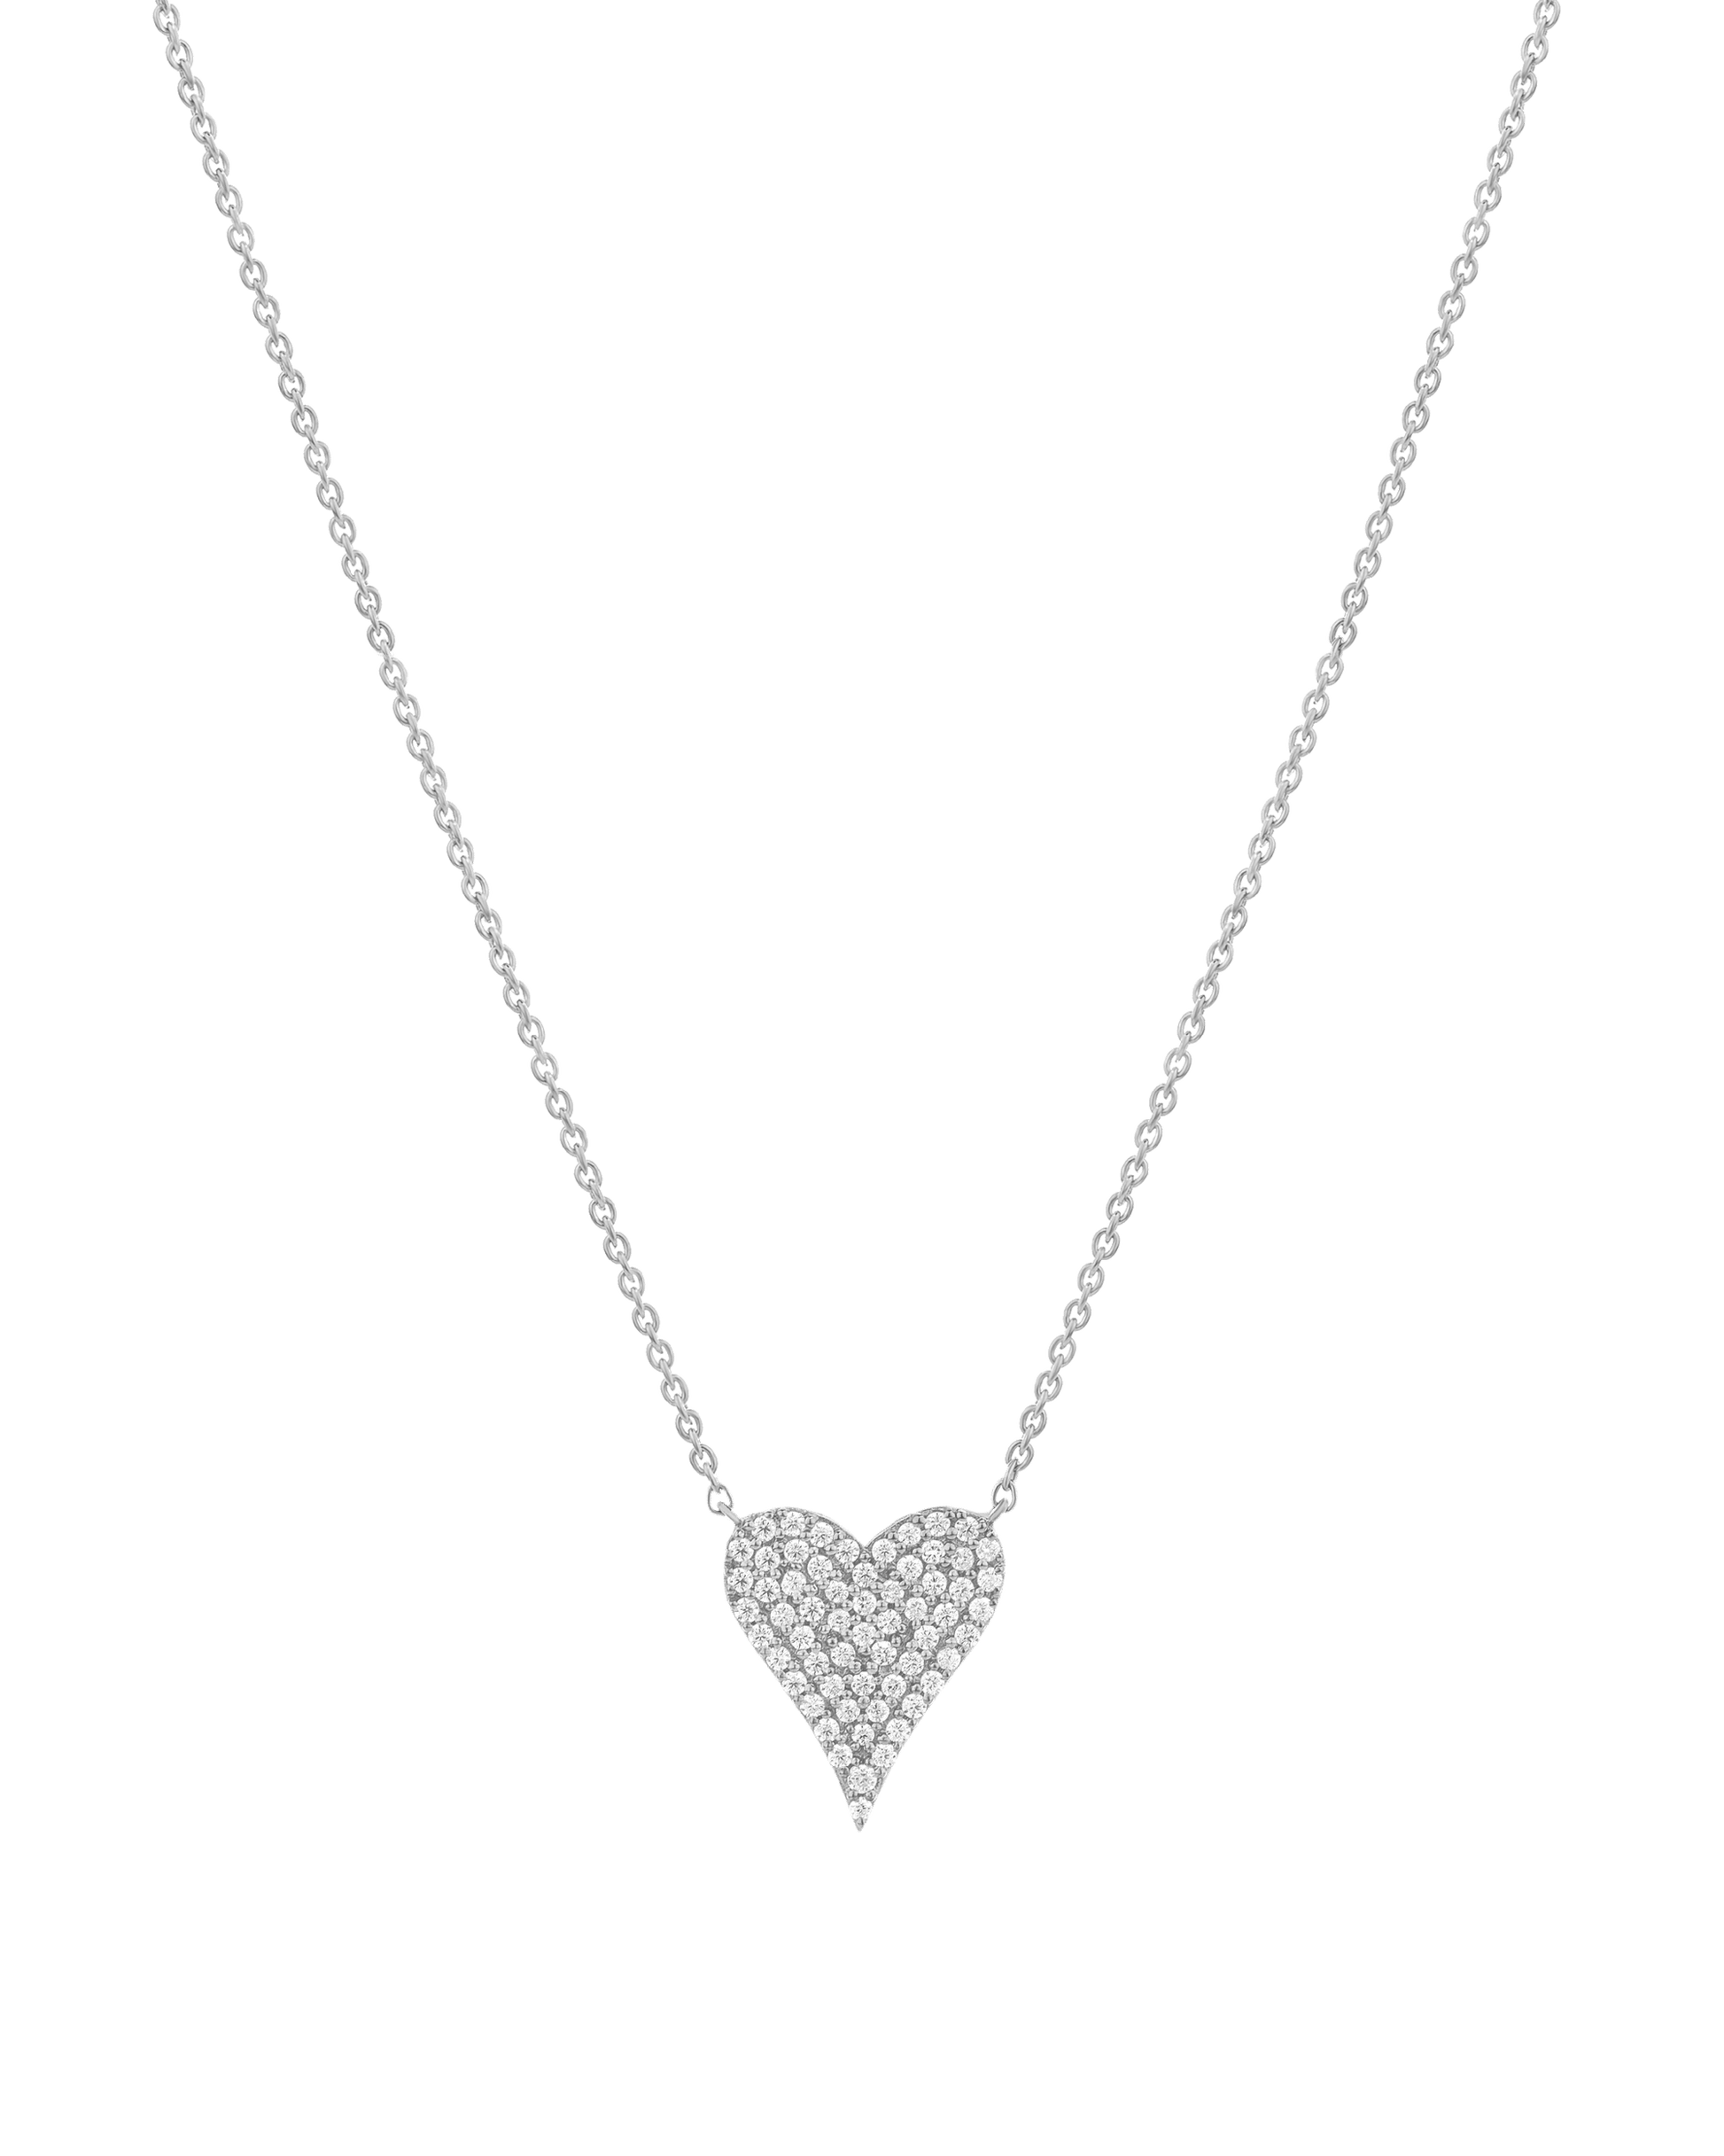 Medium Diamond Paved Heart Necklace - 14K Yellow Gold Necklaces magal-dev 